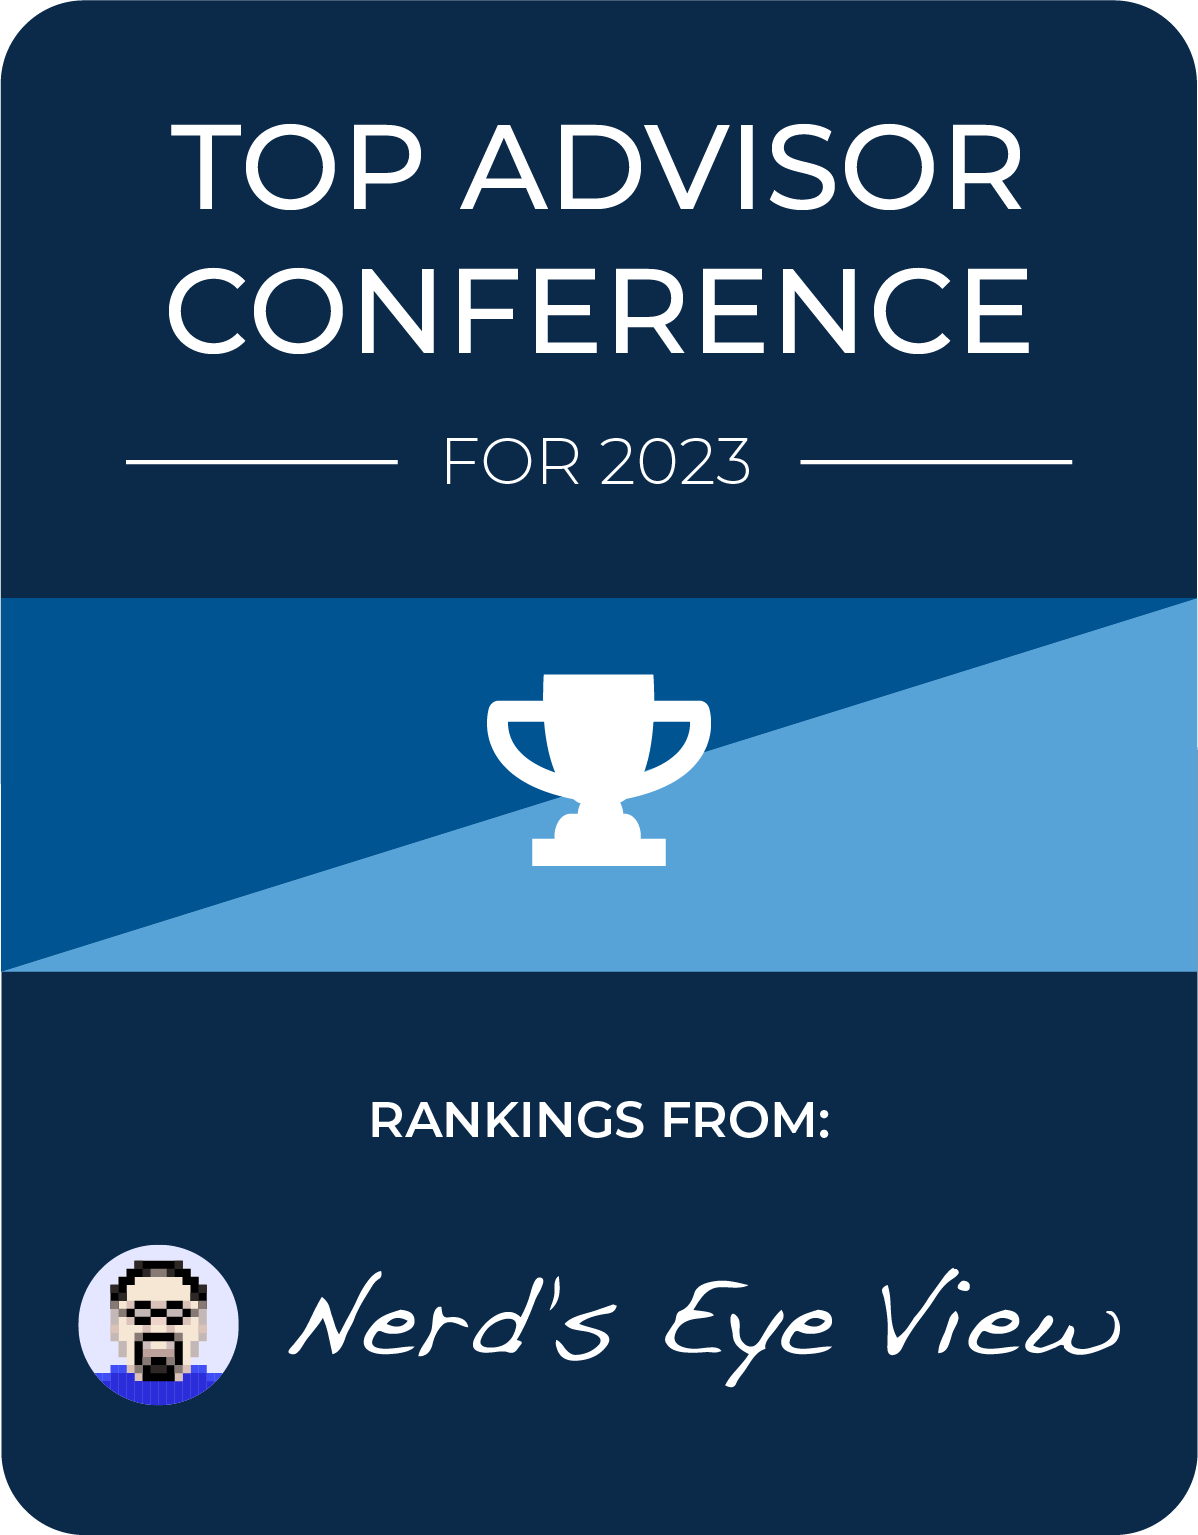 Best Conferences For Top Financial Advisors in 2023 - Rankings From Nerd's Eye View